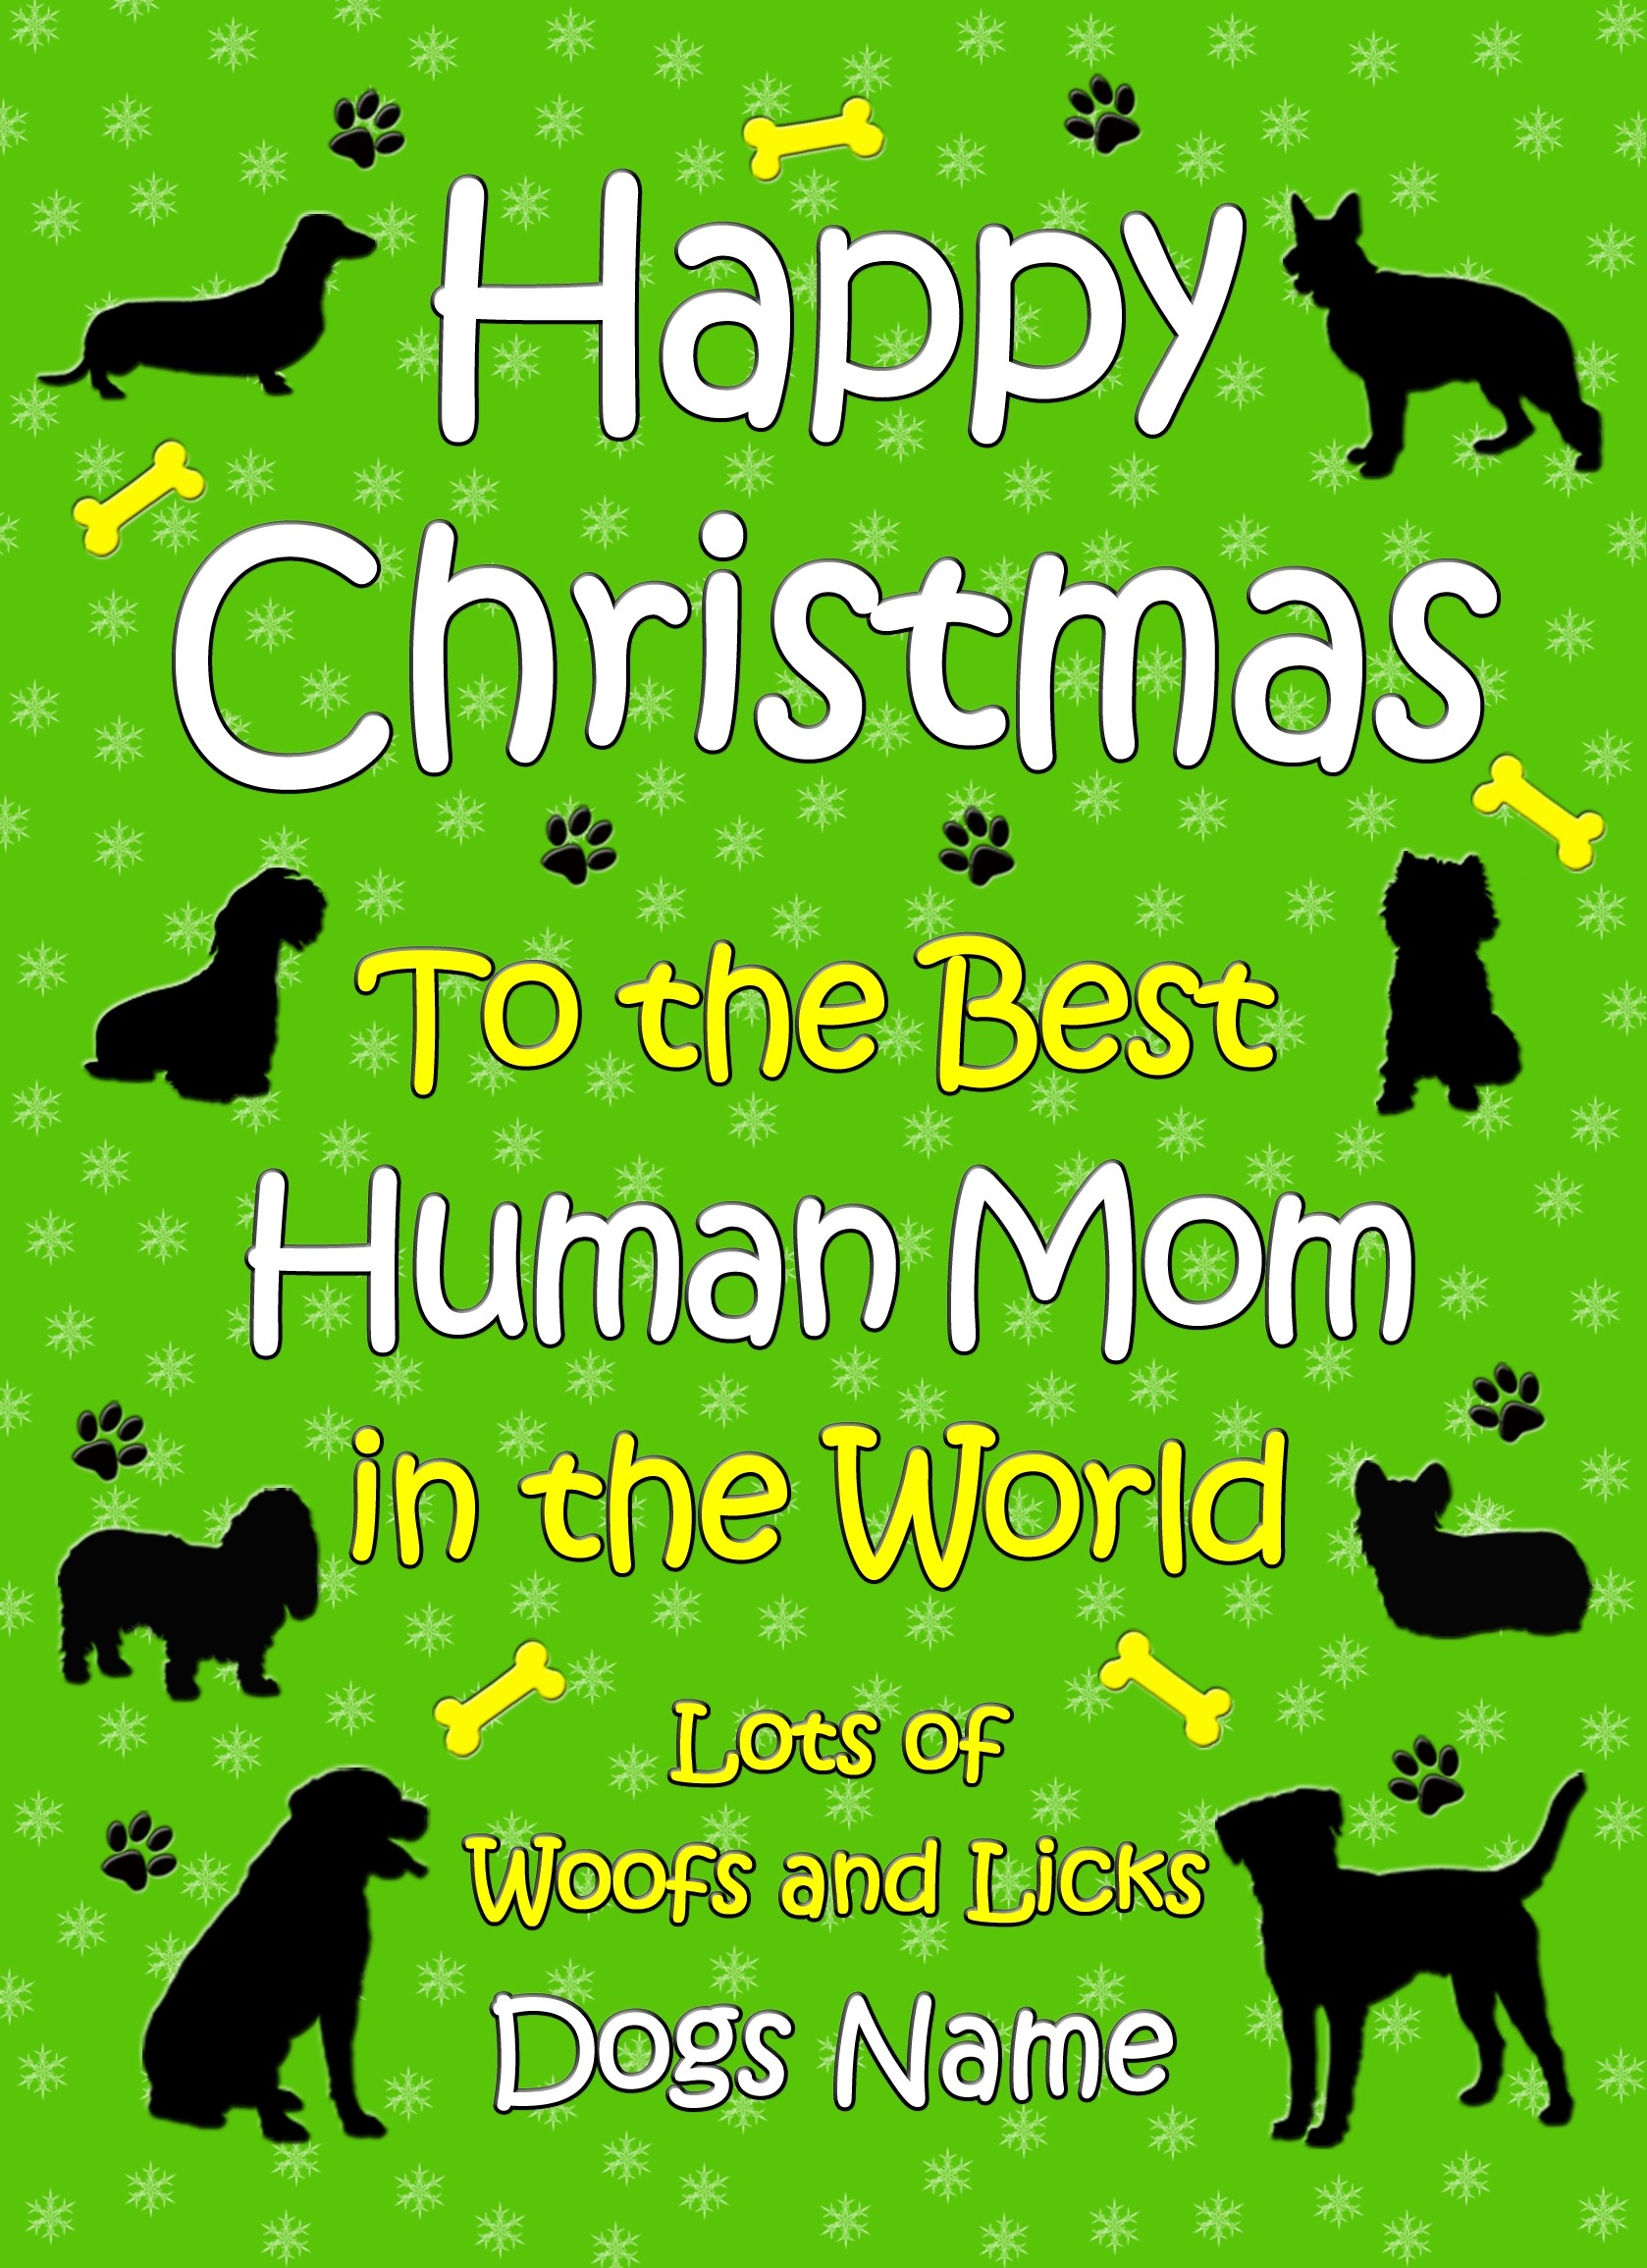 Personalised From The Dog Christmas Card (Human Mom, Green)